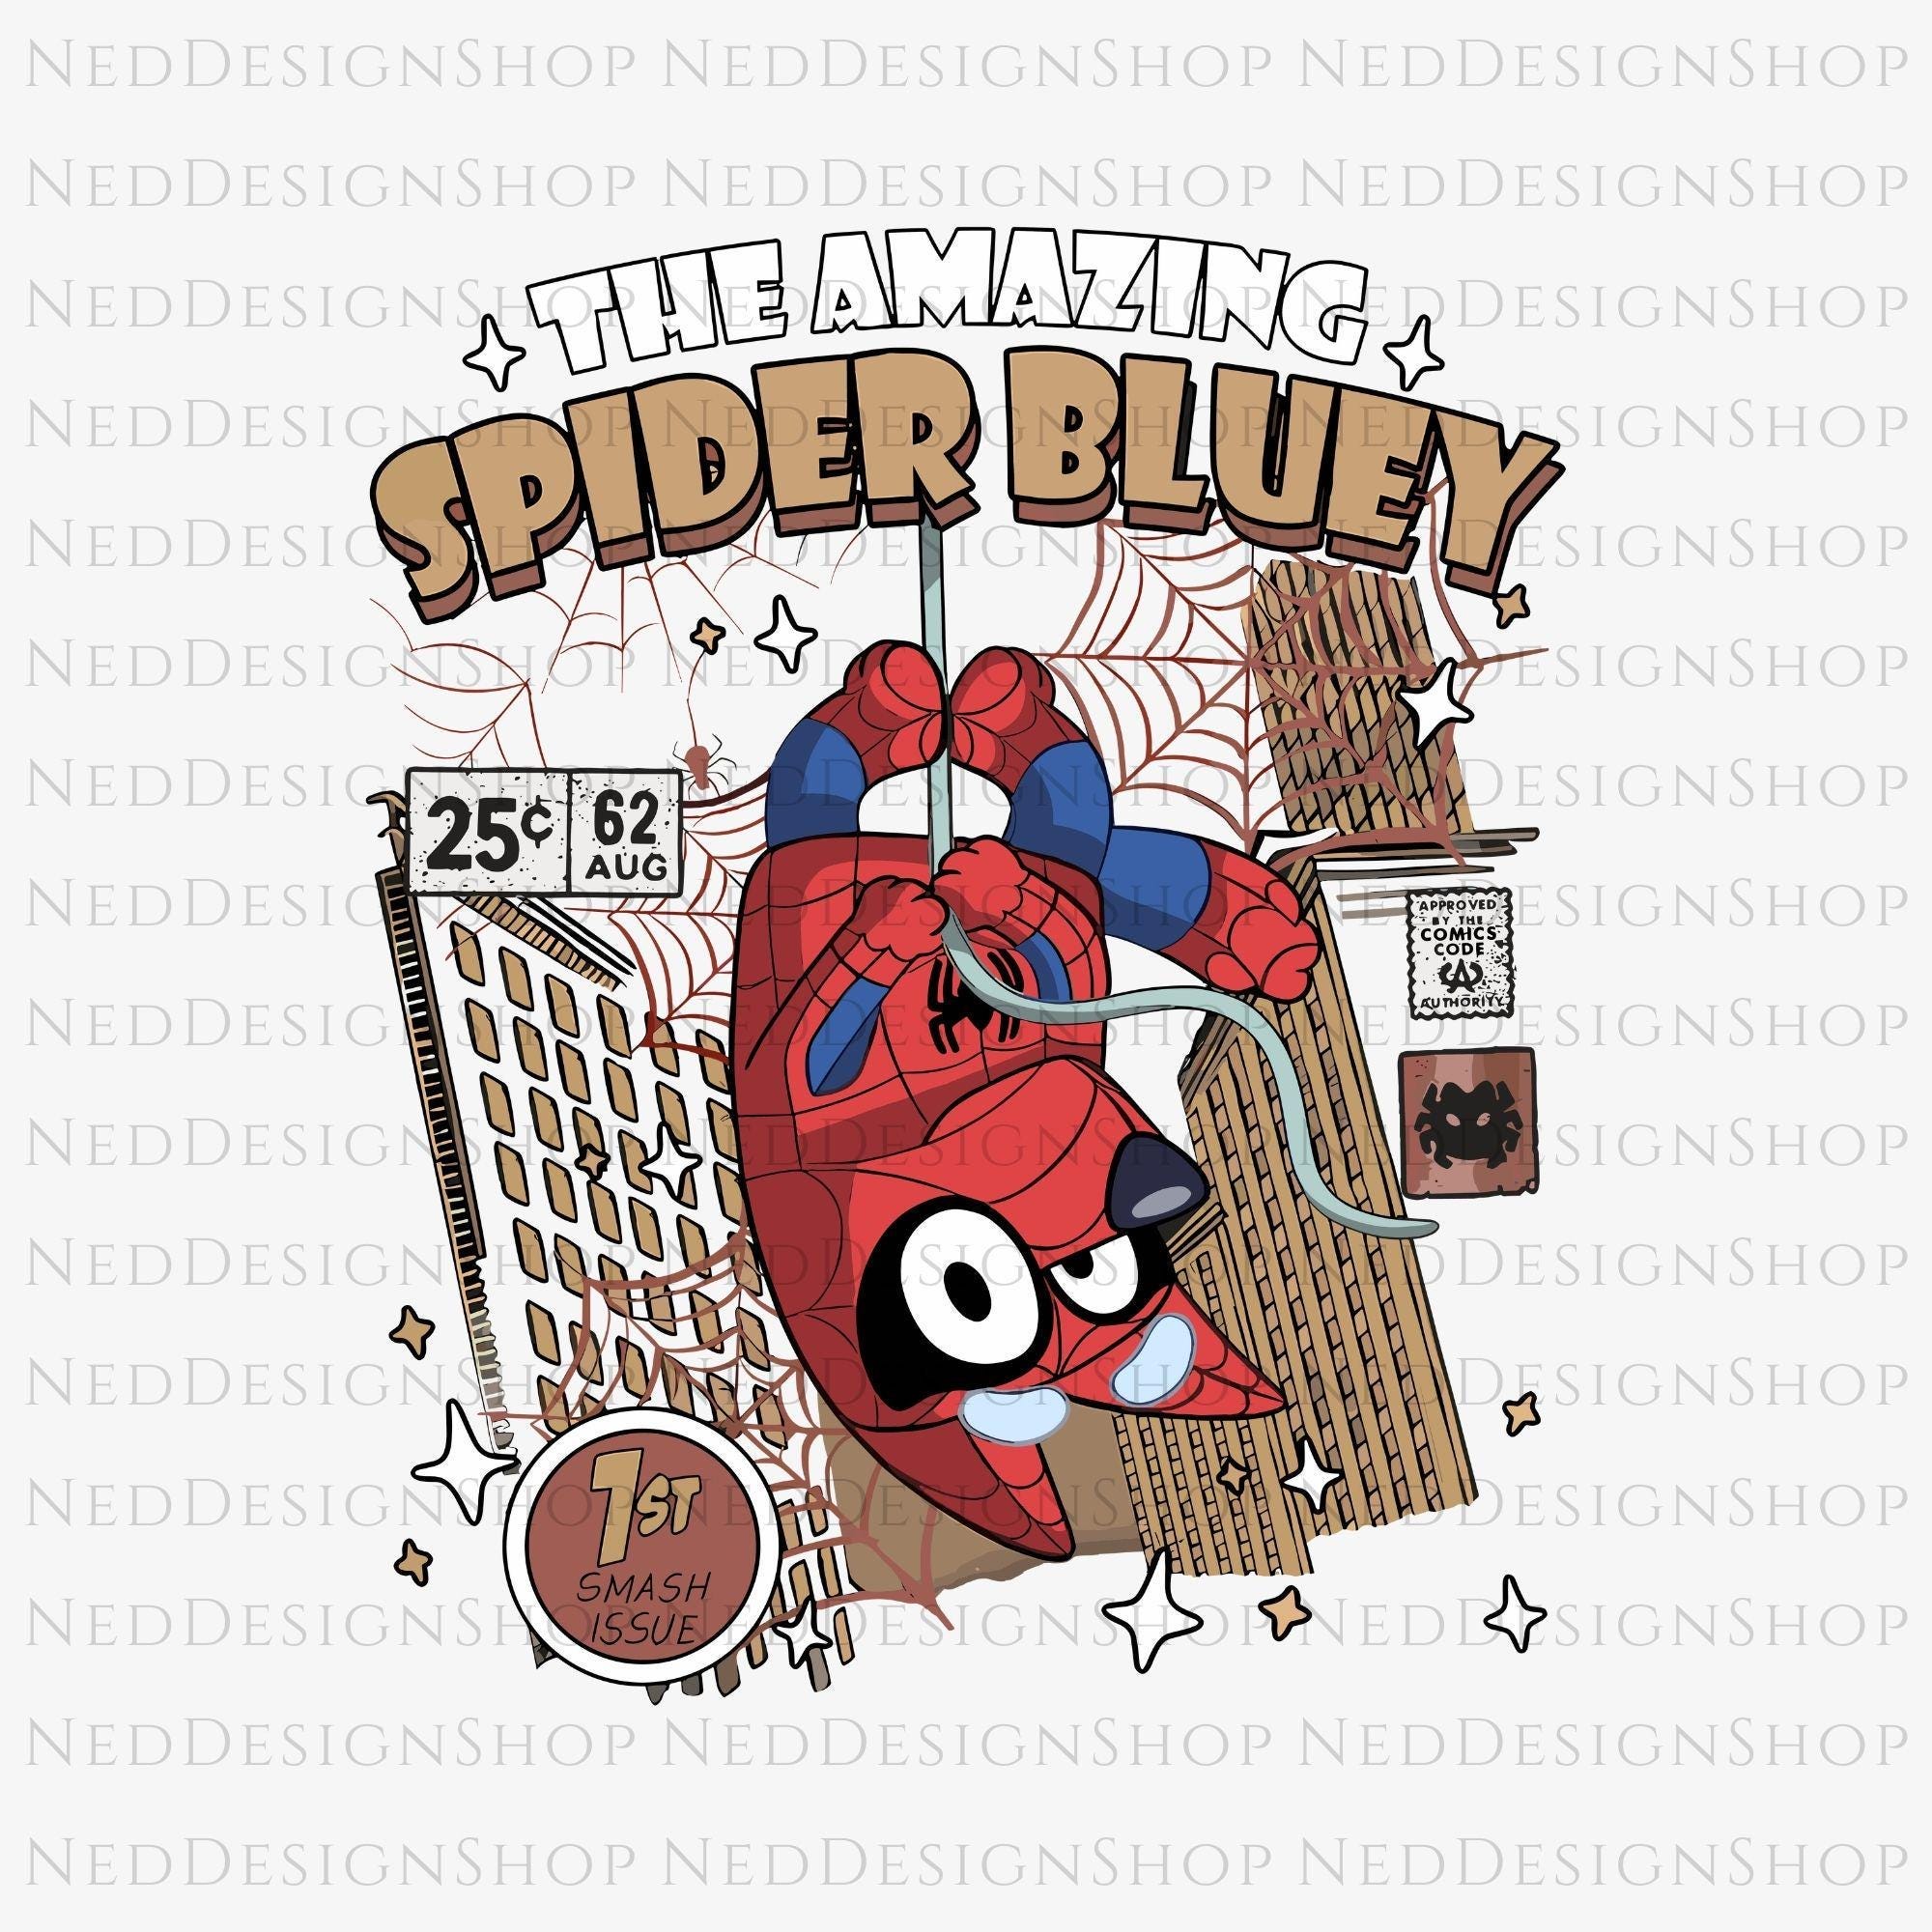 Amazing Across Spider Bluey Man Png Spiderman Png, Blue Dogs Png, Dog Family Png, Spiderman Png, Spider Bluey Png, Digital File, Only Png